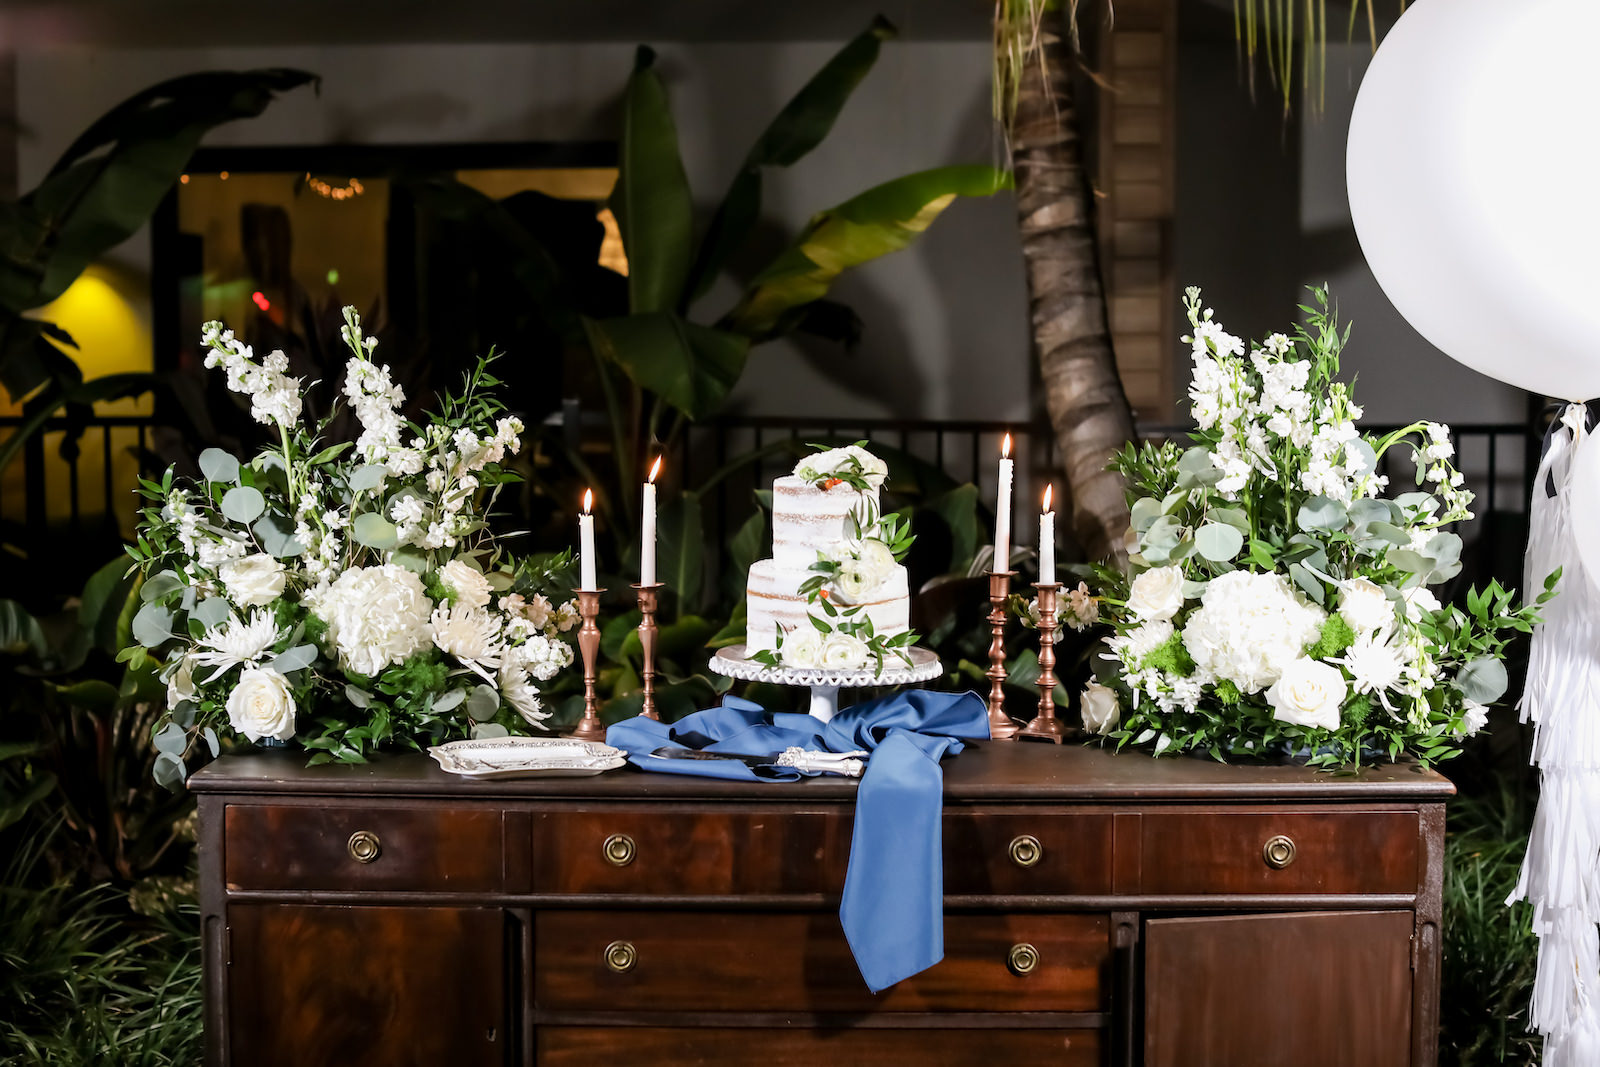 Vintage Inspired Wedding Dessert Table with Two-Tier Semi Naked Iced Wedding Cake with White Frosting, Ivory Florals, and Greenery, Blue Linen Decor with Brass Candlesticks and Lush Tropical Floral Arrangements | Florida Wedding Photographer Lifelong Wedding Photography Studio | Sarasota Wedding Planner Kelly Kennedy Weddings